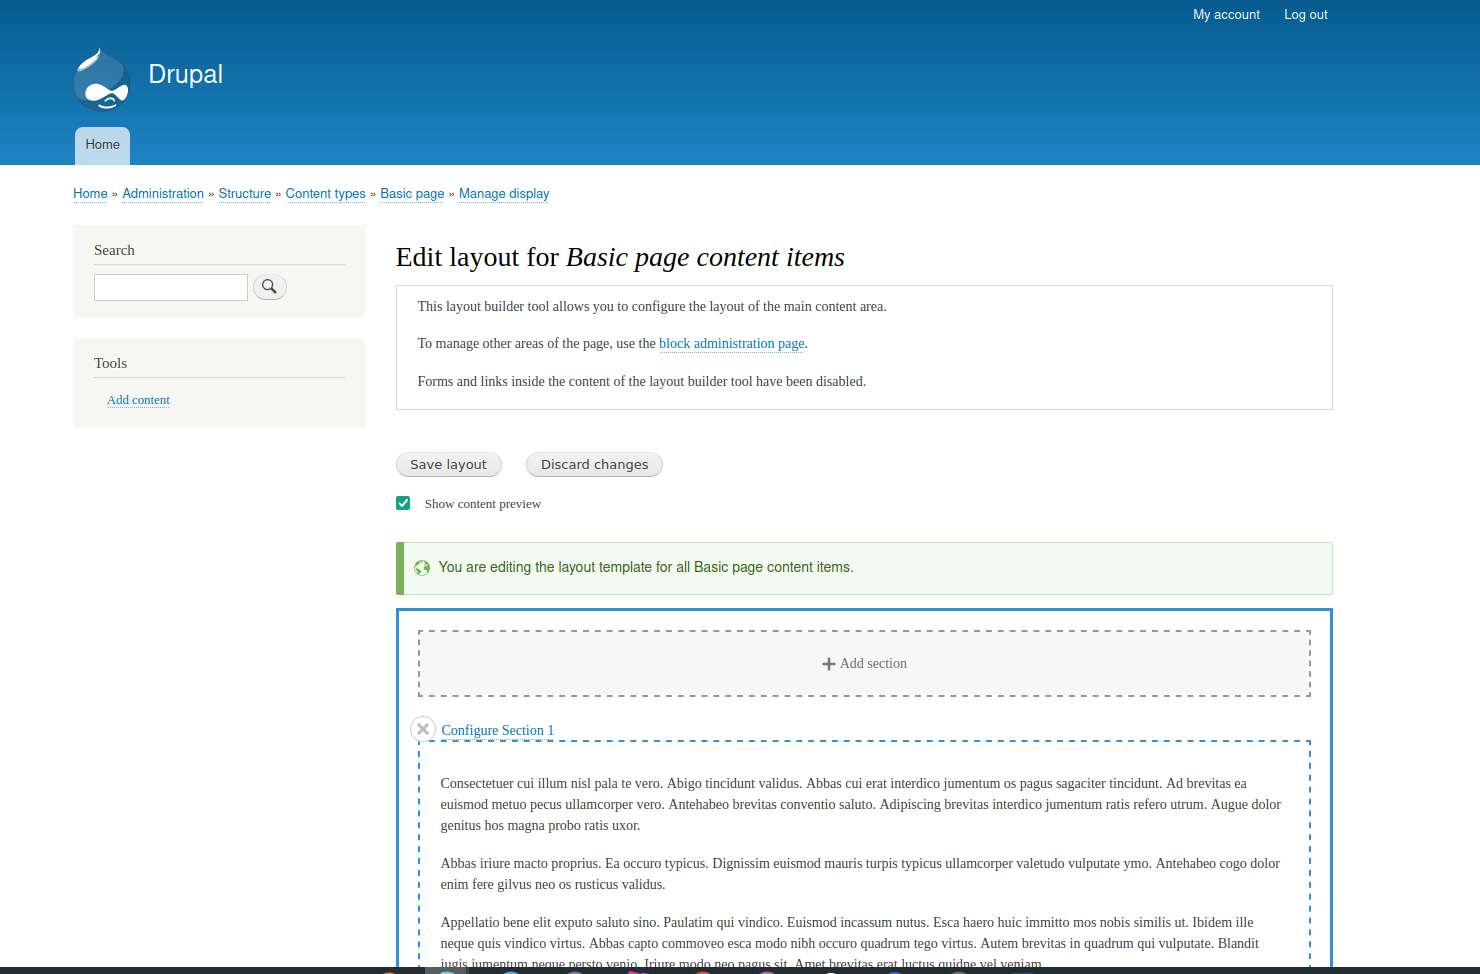 Layout editing page in Drupal that you can access by clicking the Manage layout button